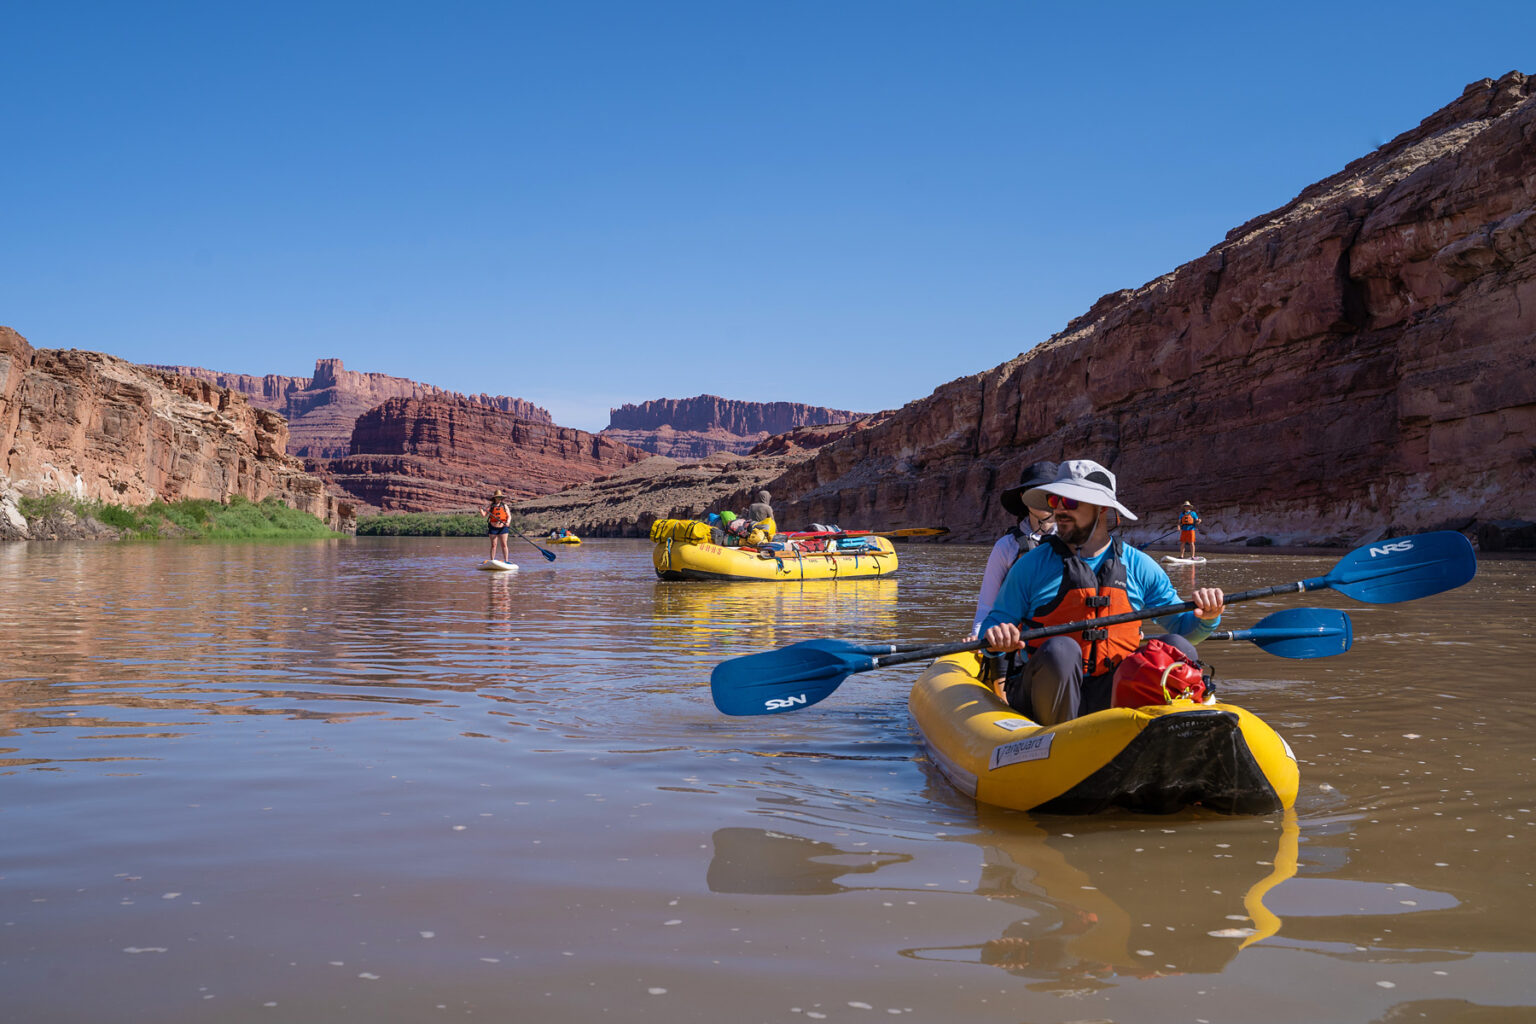 People in various watercraft on the Colorado River, including stand-up paddleboards, inflatable kayaks, and oar rafts